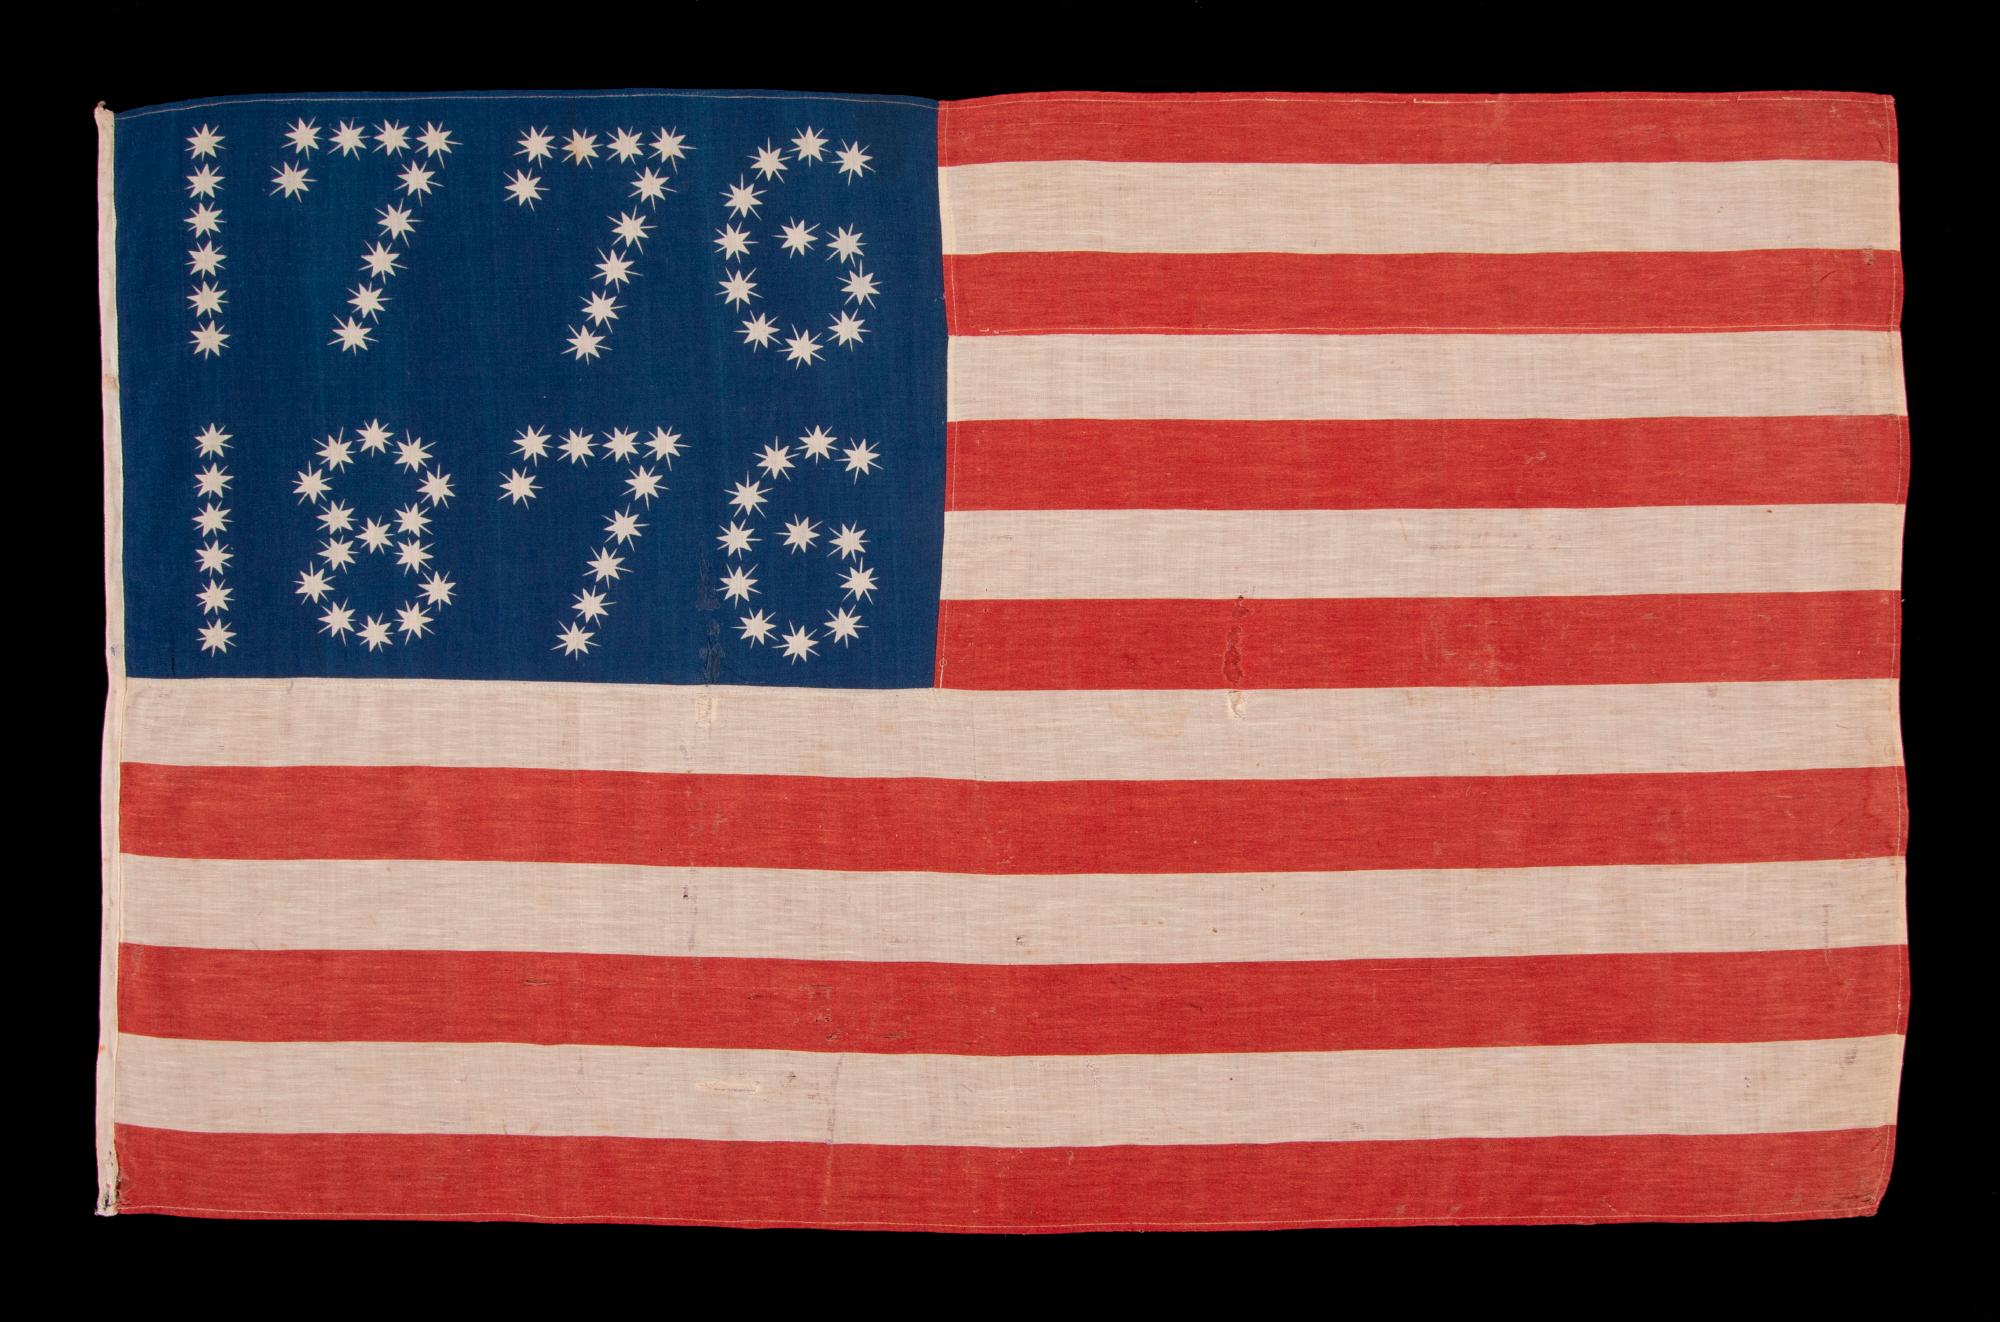 Antique American flag with 10-pointed stars that spell “1776 – 1876”, made for the 100-year anniversary of American Independence, one of the most graphic of all early examples:

Many fantastic star patterns were made in the patriotism that